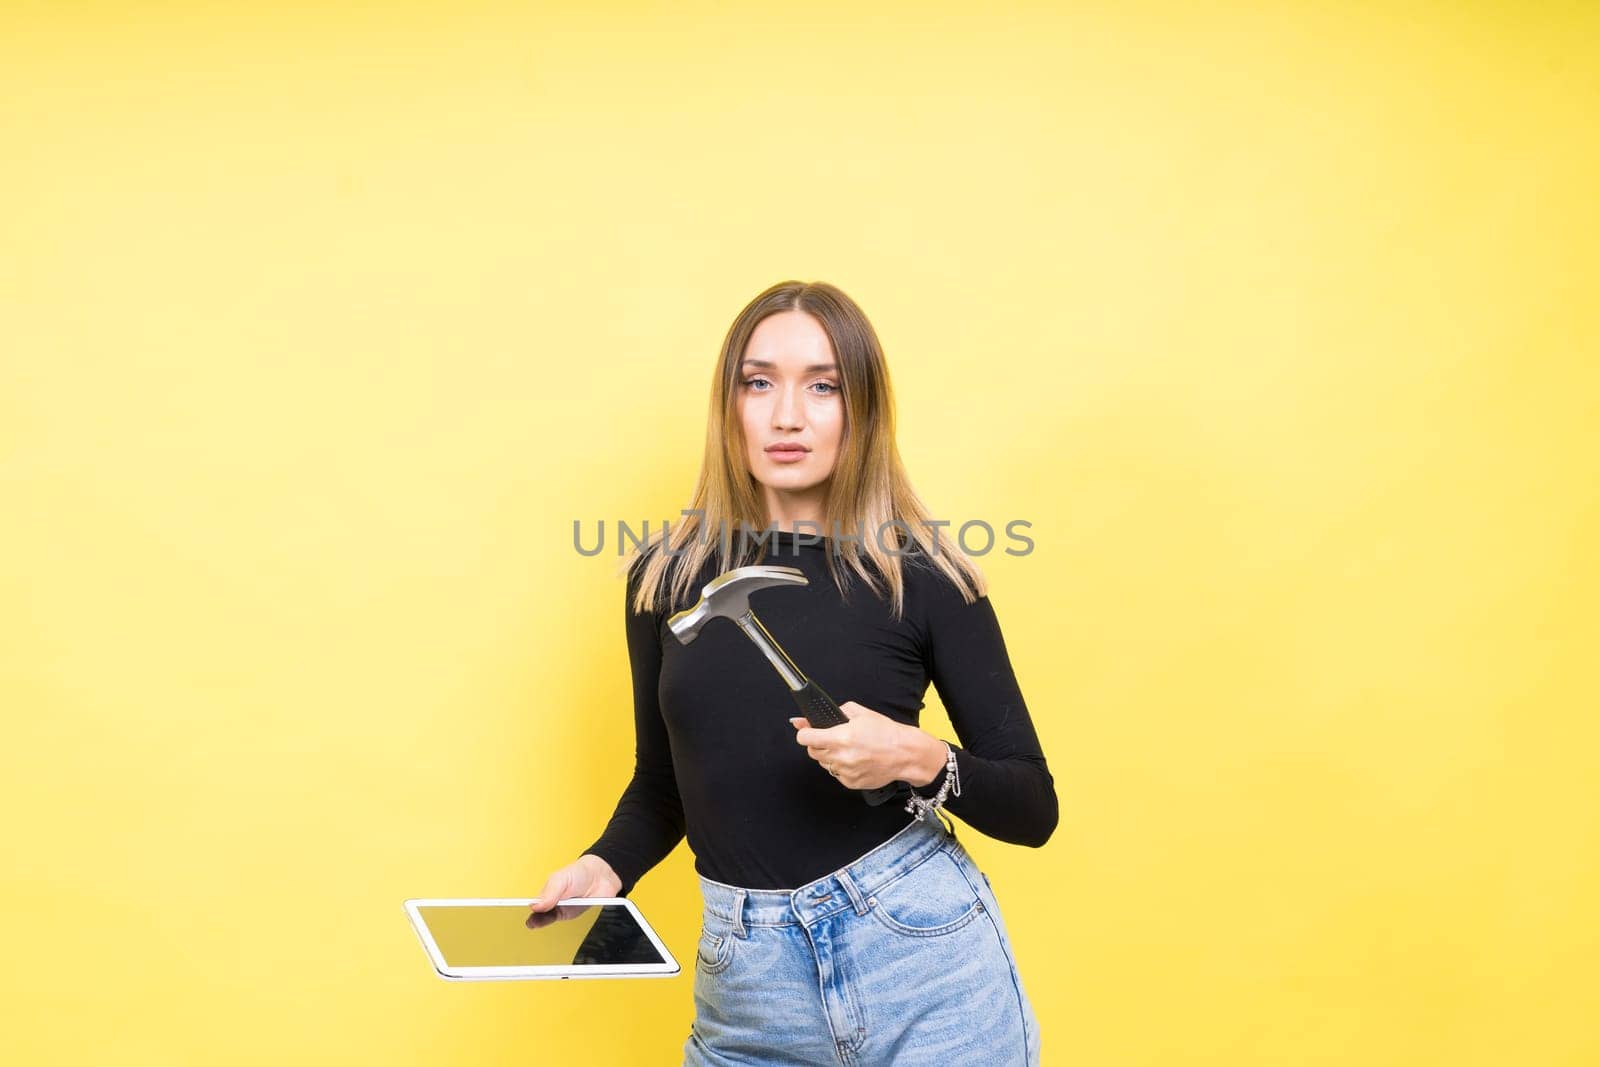 Attractive blond hair woman wearing business suit in front of computer holding a hammer